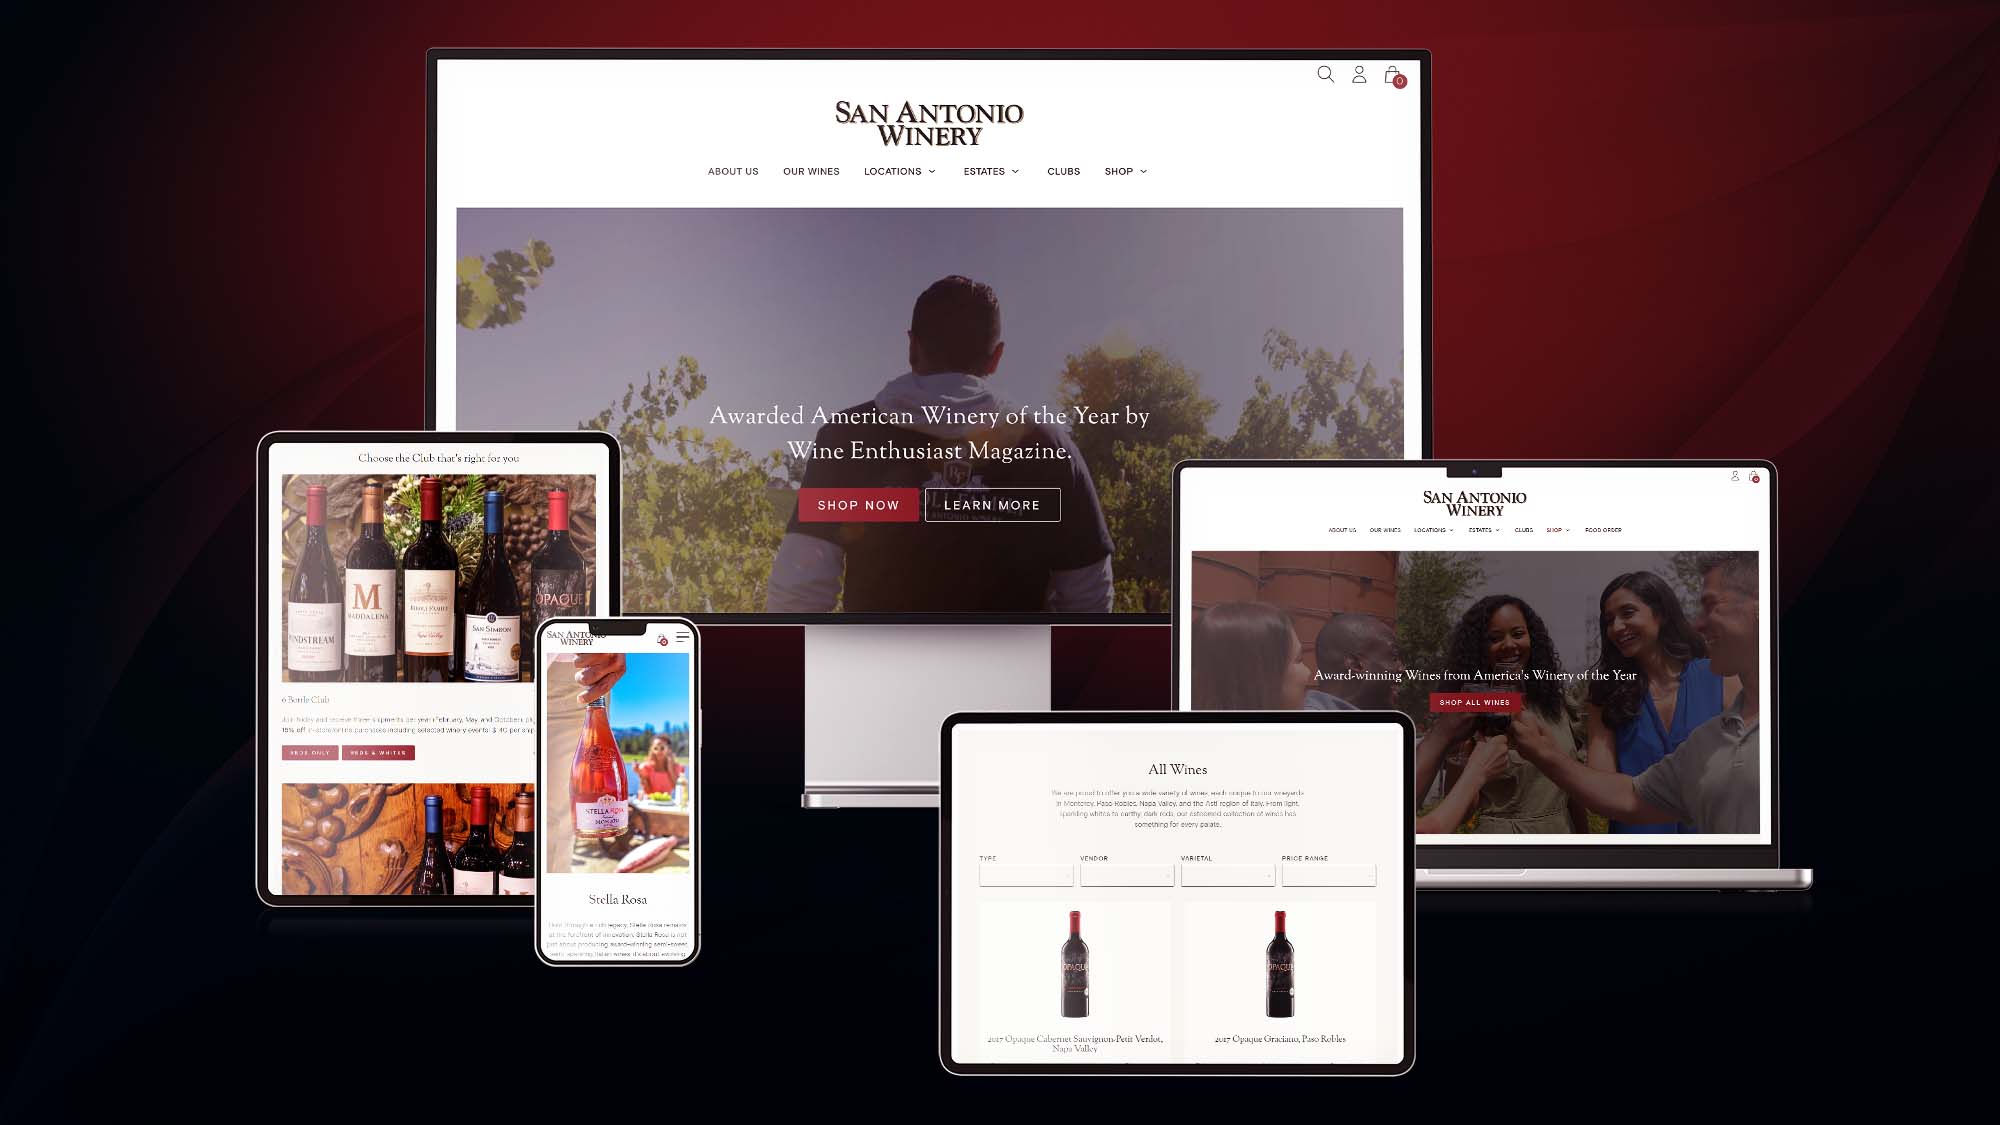 Display of pages from San Antonio Winery website, shown on phone, tablet portrait, tablet horizontal, laptop, and large desktop monitor.